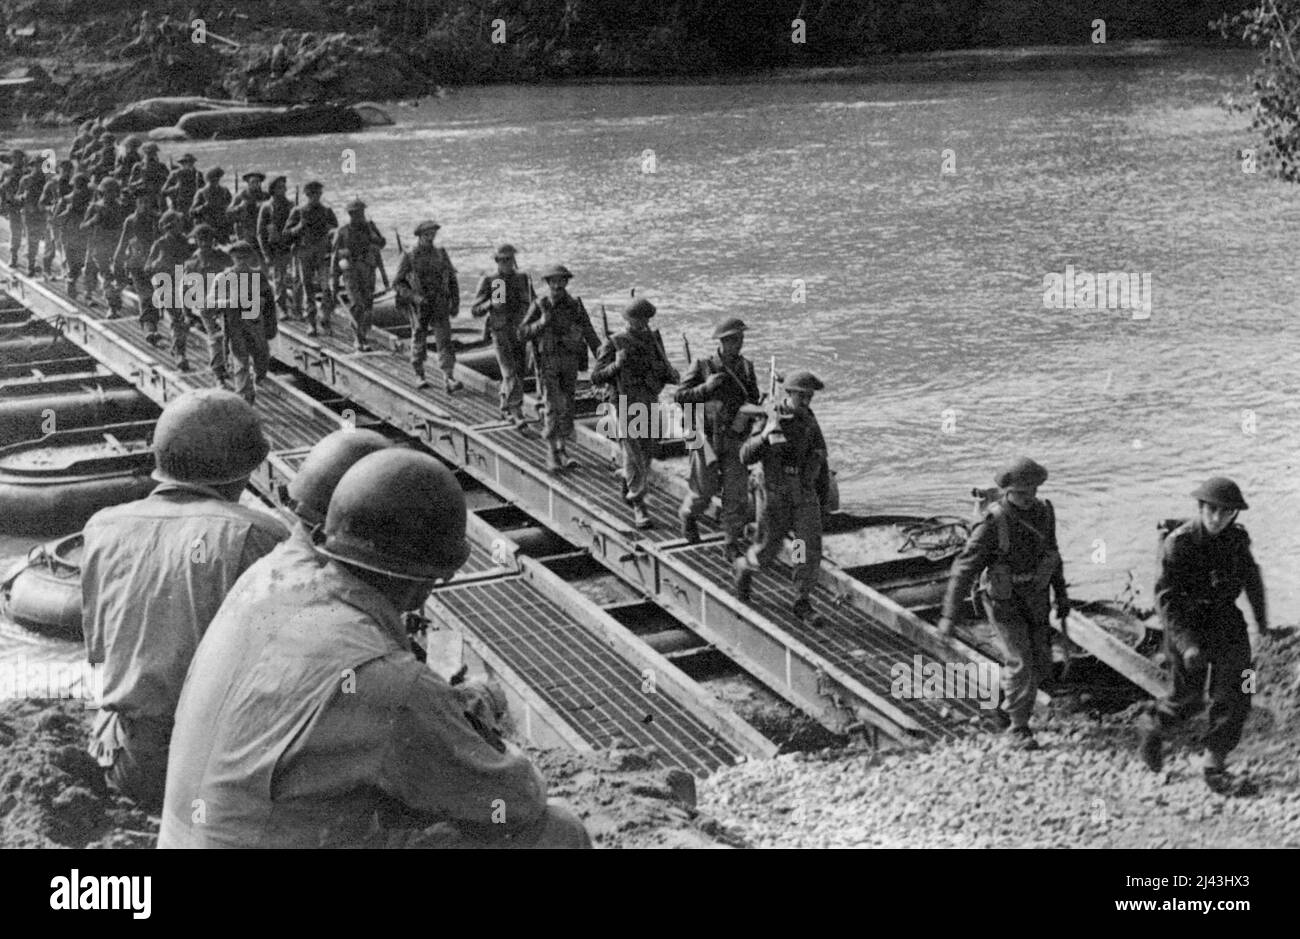 Crossing the River Volturno: Three American engineers watch British troops and transport crossing a Volturno Bridge. On October 13th, 1943, under cover of darkness the Fifth Army made its big assault on the River Volturno, one of the major barriers to advance on Rome - and crossed in force. October 31, 1943. (Photo by Fox Photos). Stock Photo